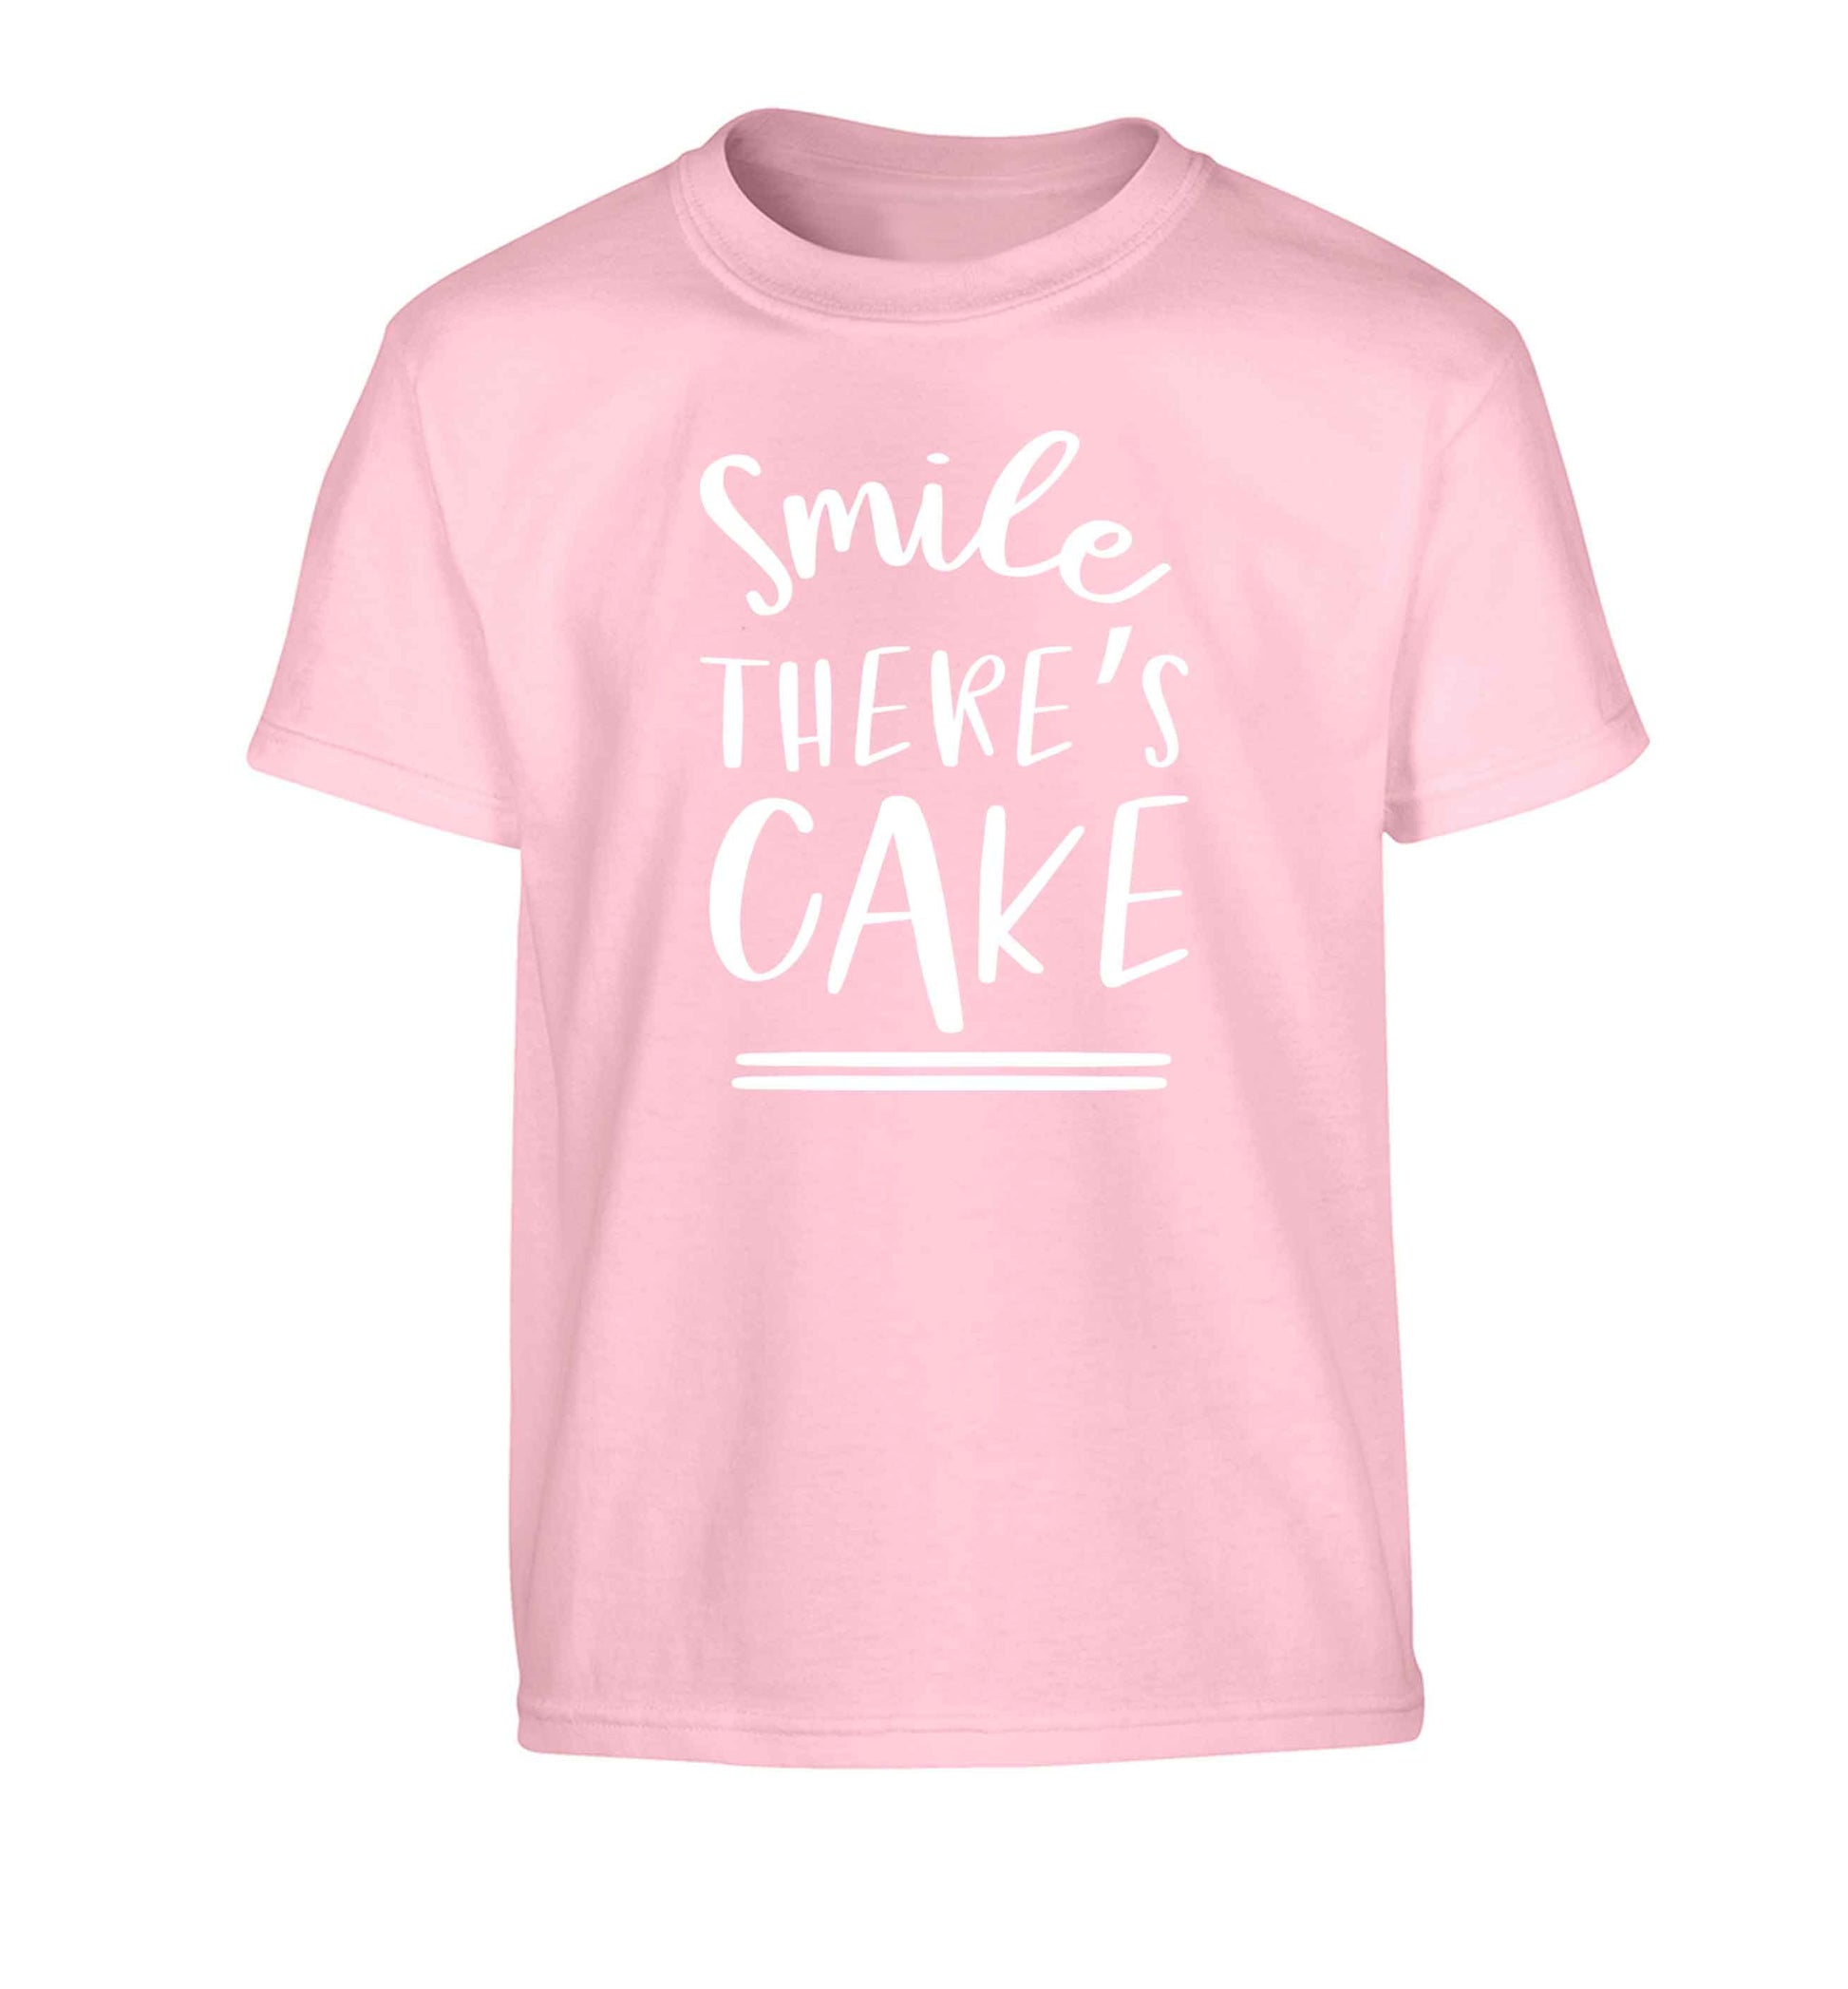 Smile there's cake Children's light pink Tshirt 12-13 Years